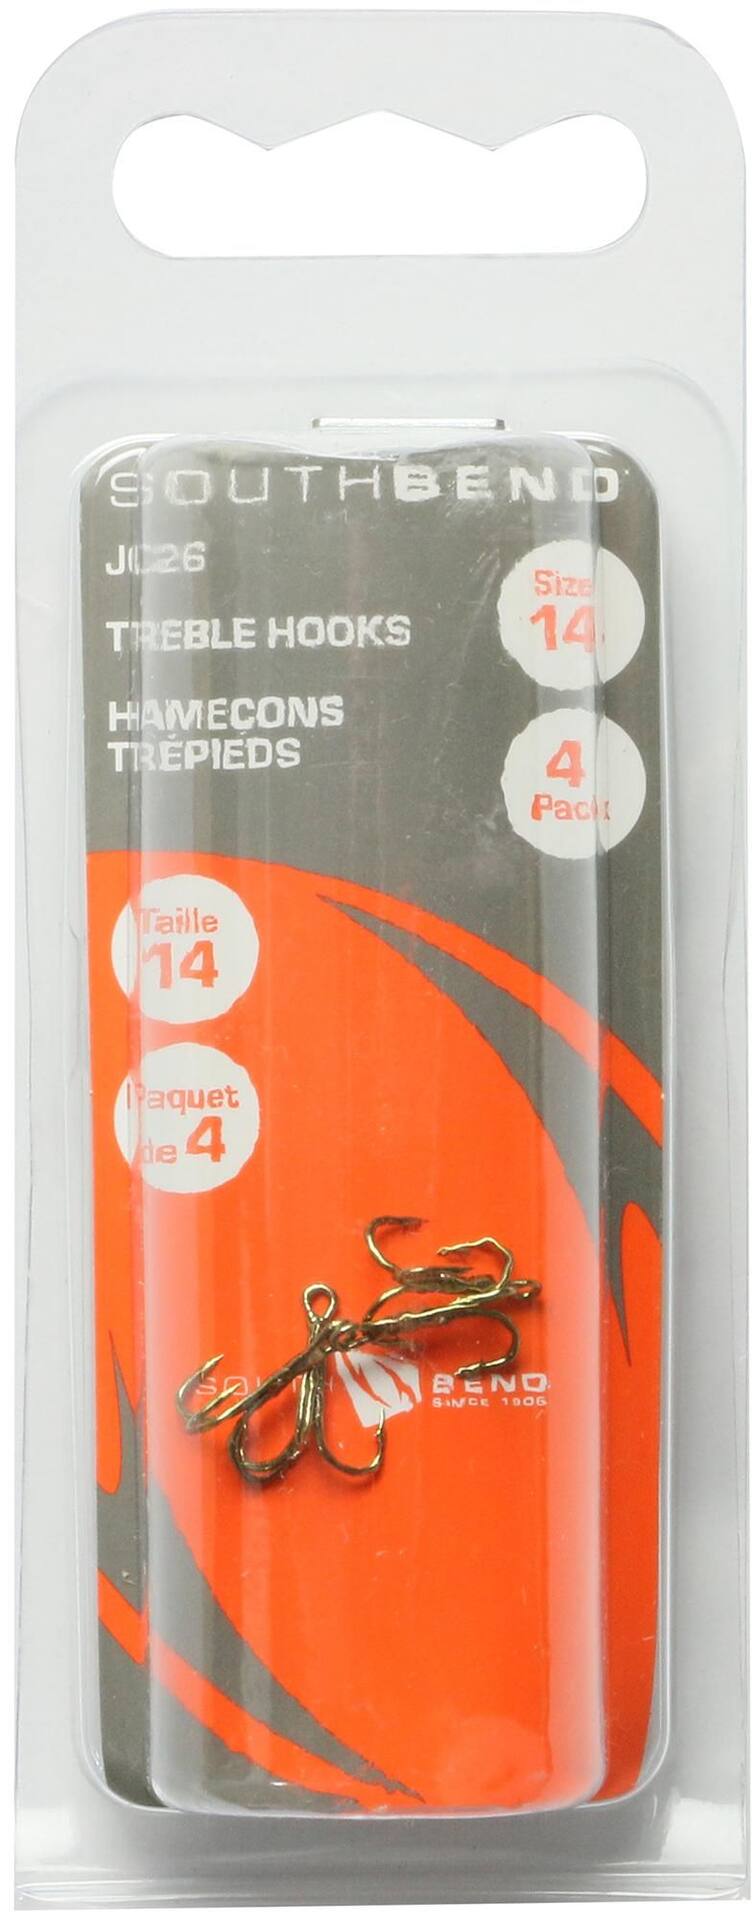 https://media-www.canadiantire.ca/product/playing/fishing/fishing-lures/0779755/south-bend-treble-hook-bronze-pack-4-size-14-7842d6b9-813a-4a31-a784-9a5f309e8c27-jpgrendition.jpg